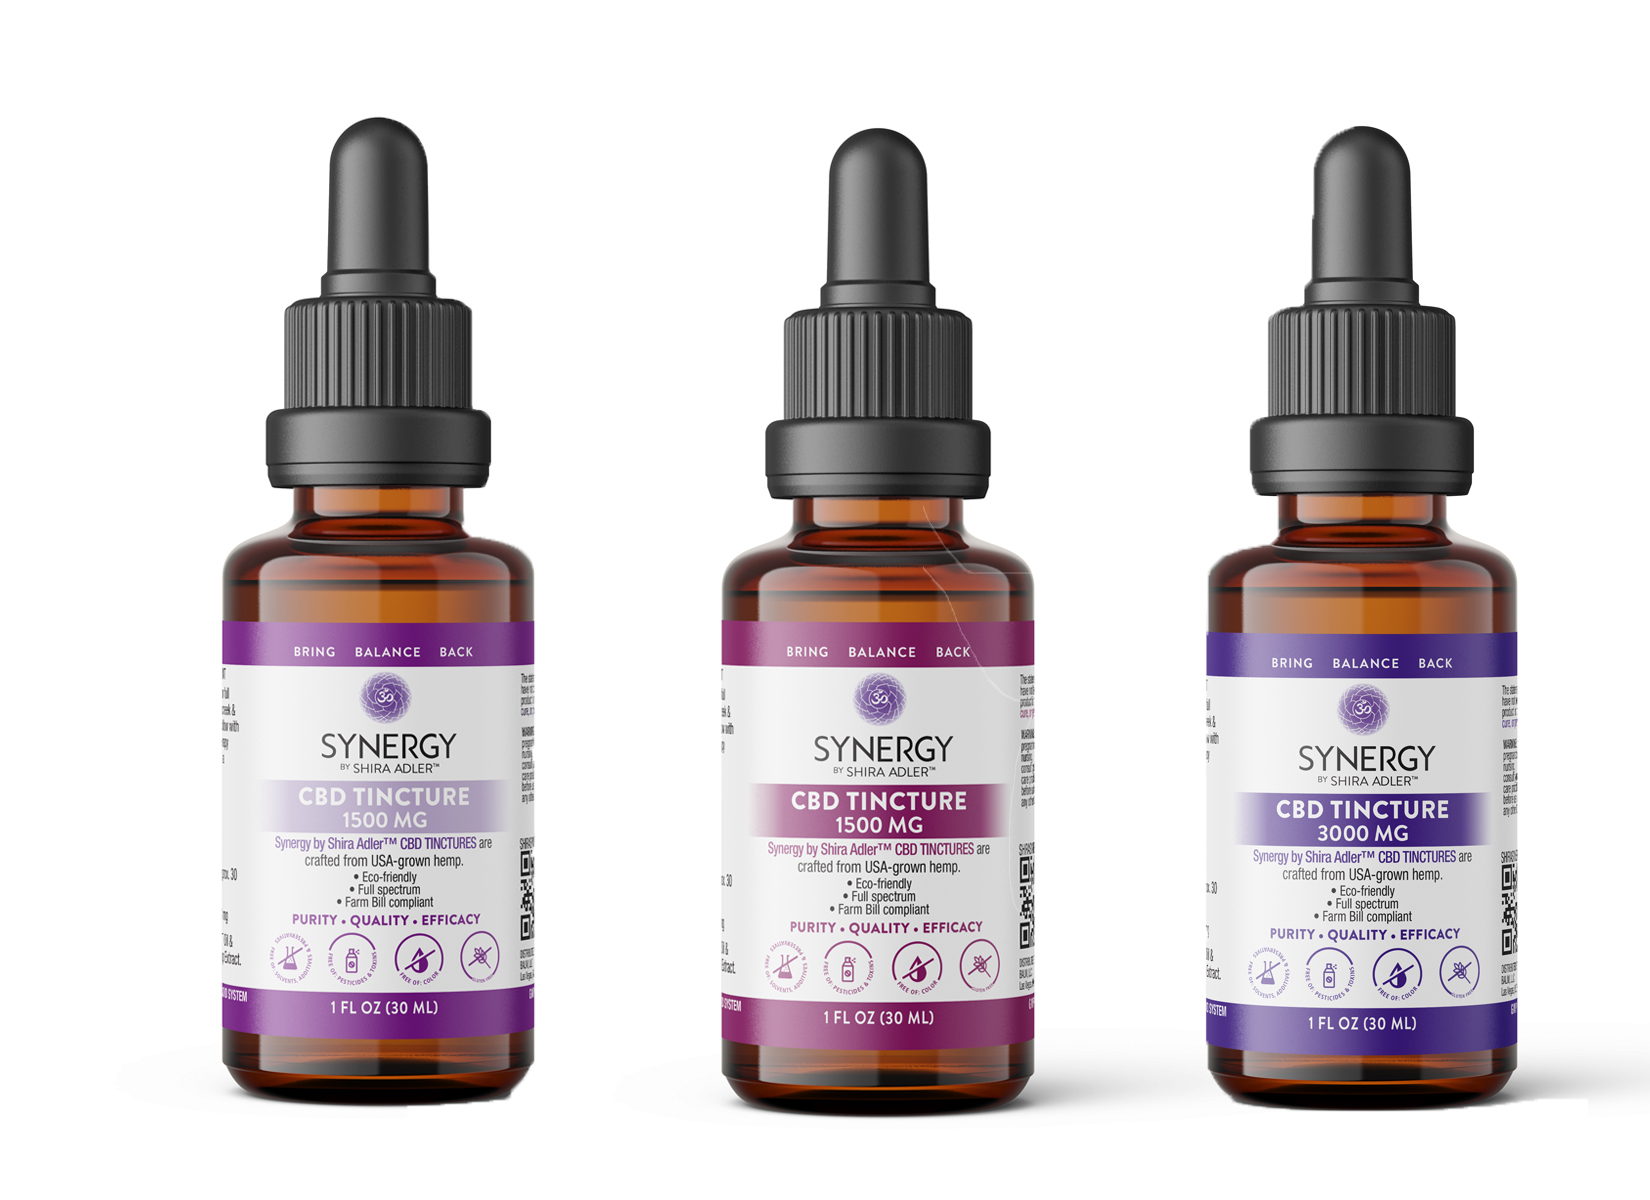 SYNERGY tinctures